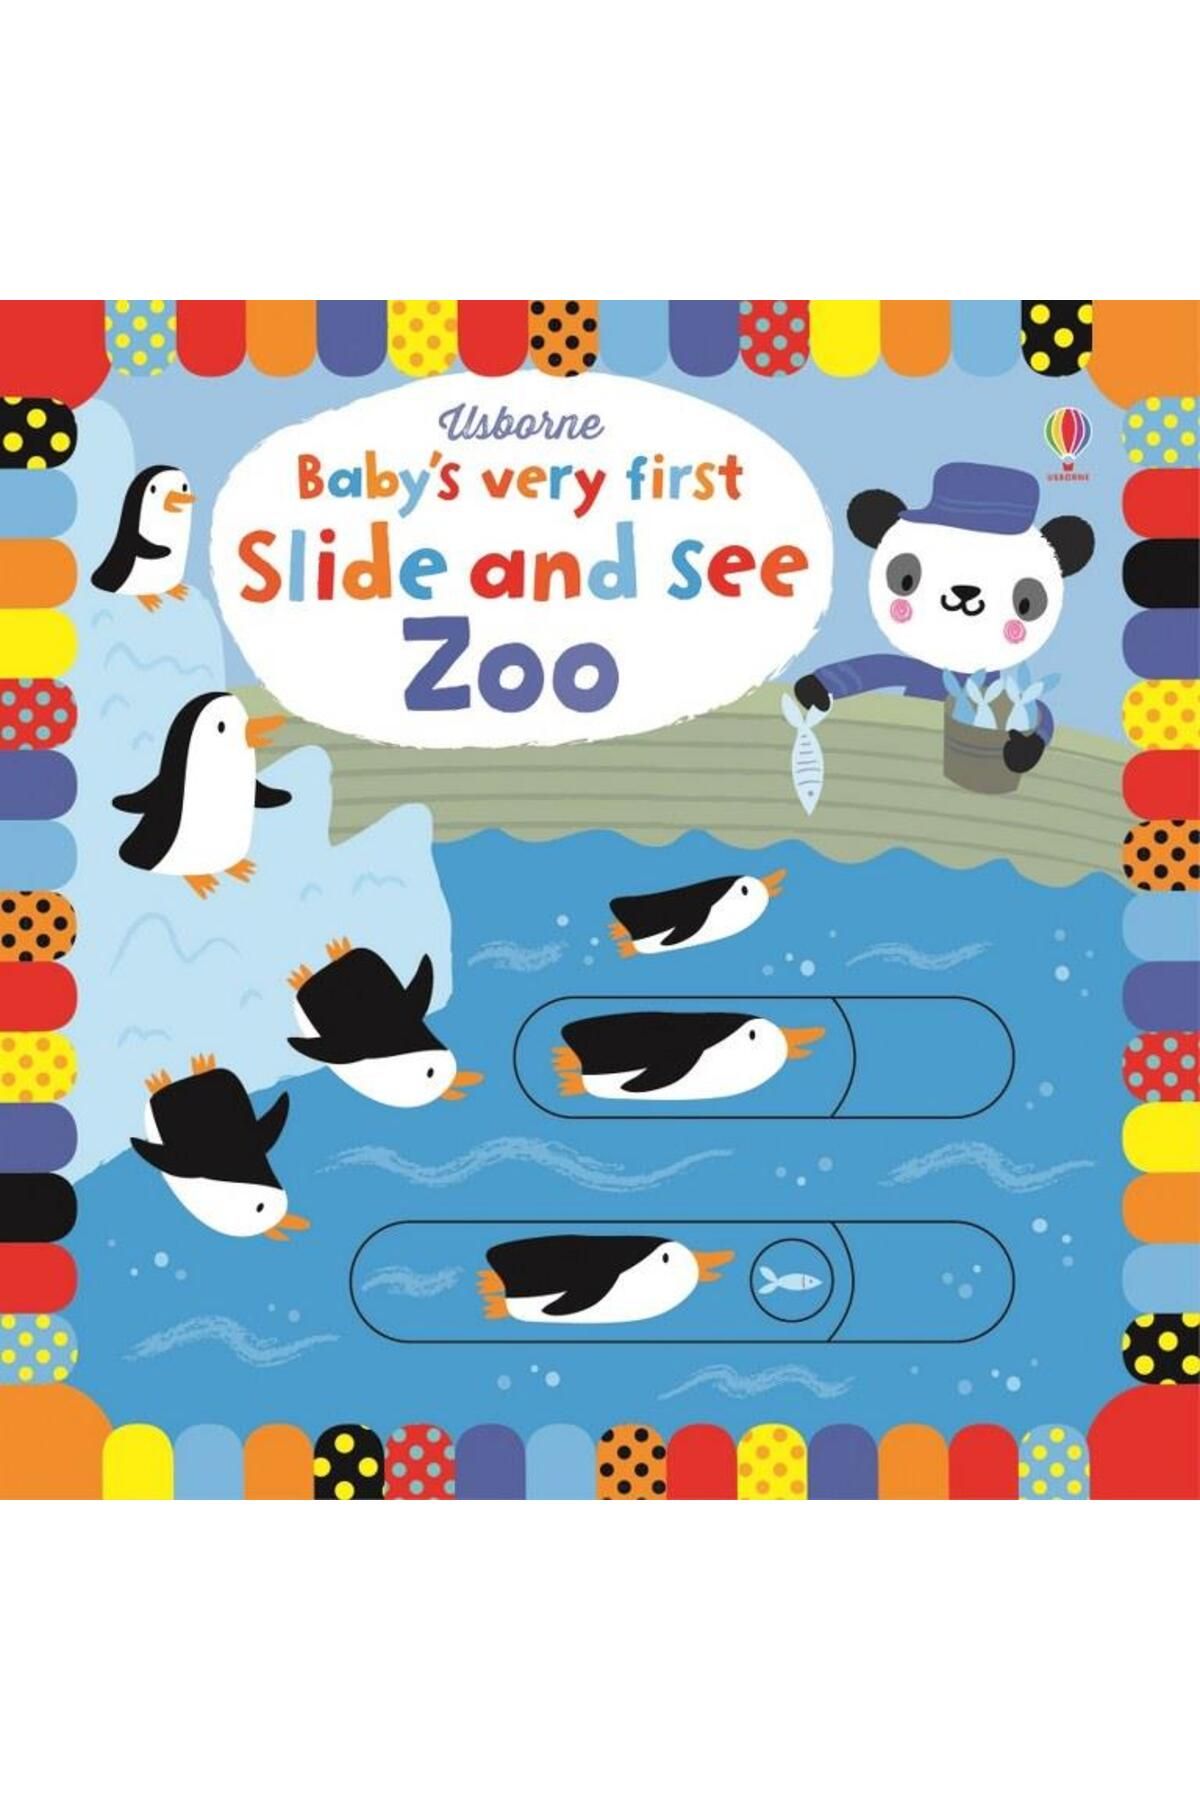 Usborne Baby S Very First Slide And See Zoo